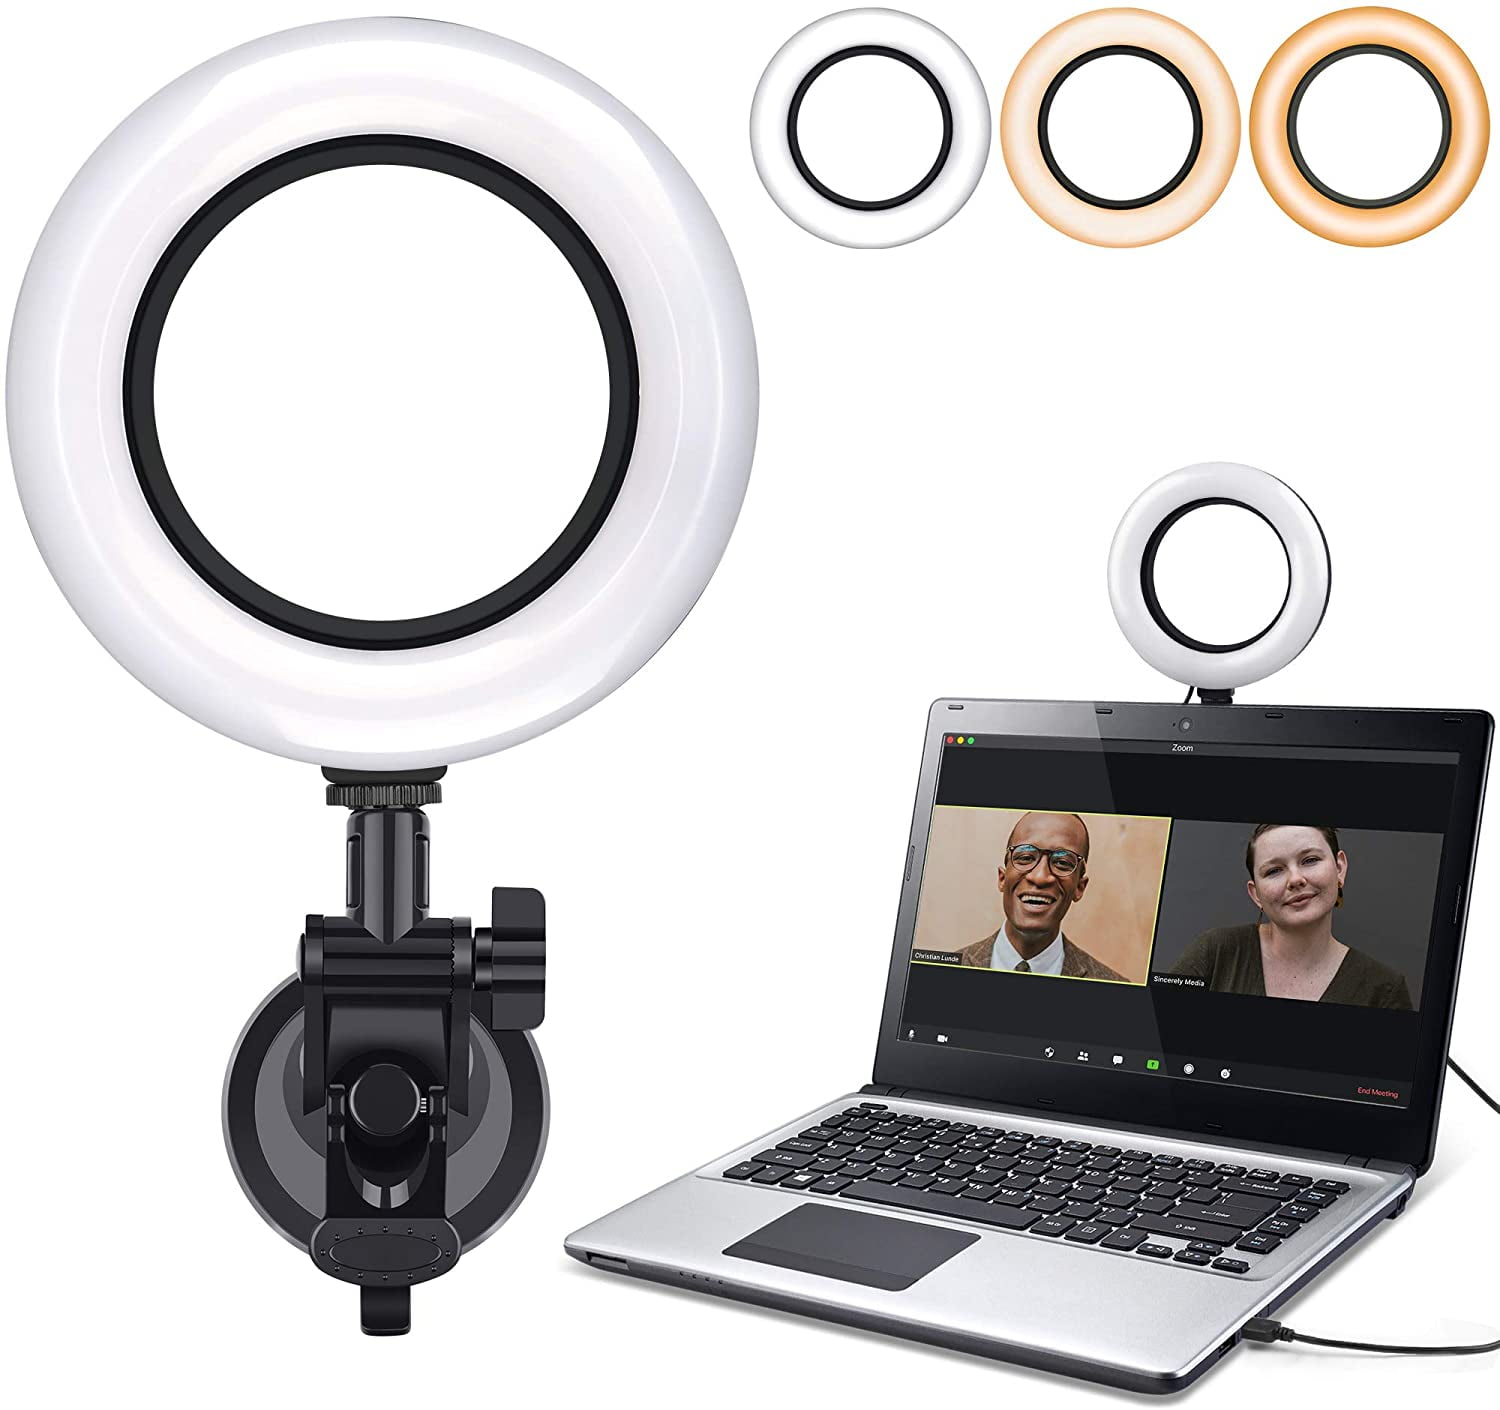 Zoom Lighting for Computer Yarrashop Ring Light for Computer Live Streaming Webcam Lighting Online Chat Clip on Laptop Ring Light for Video Conferencing Remote Working 